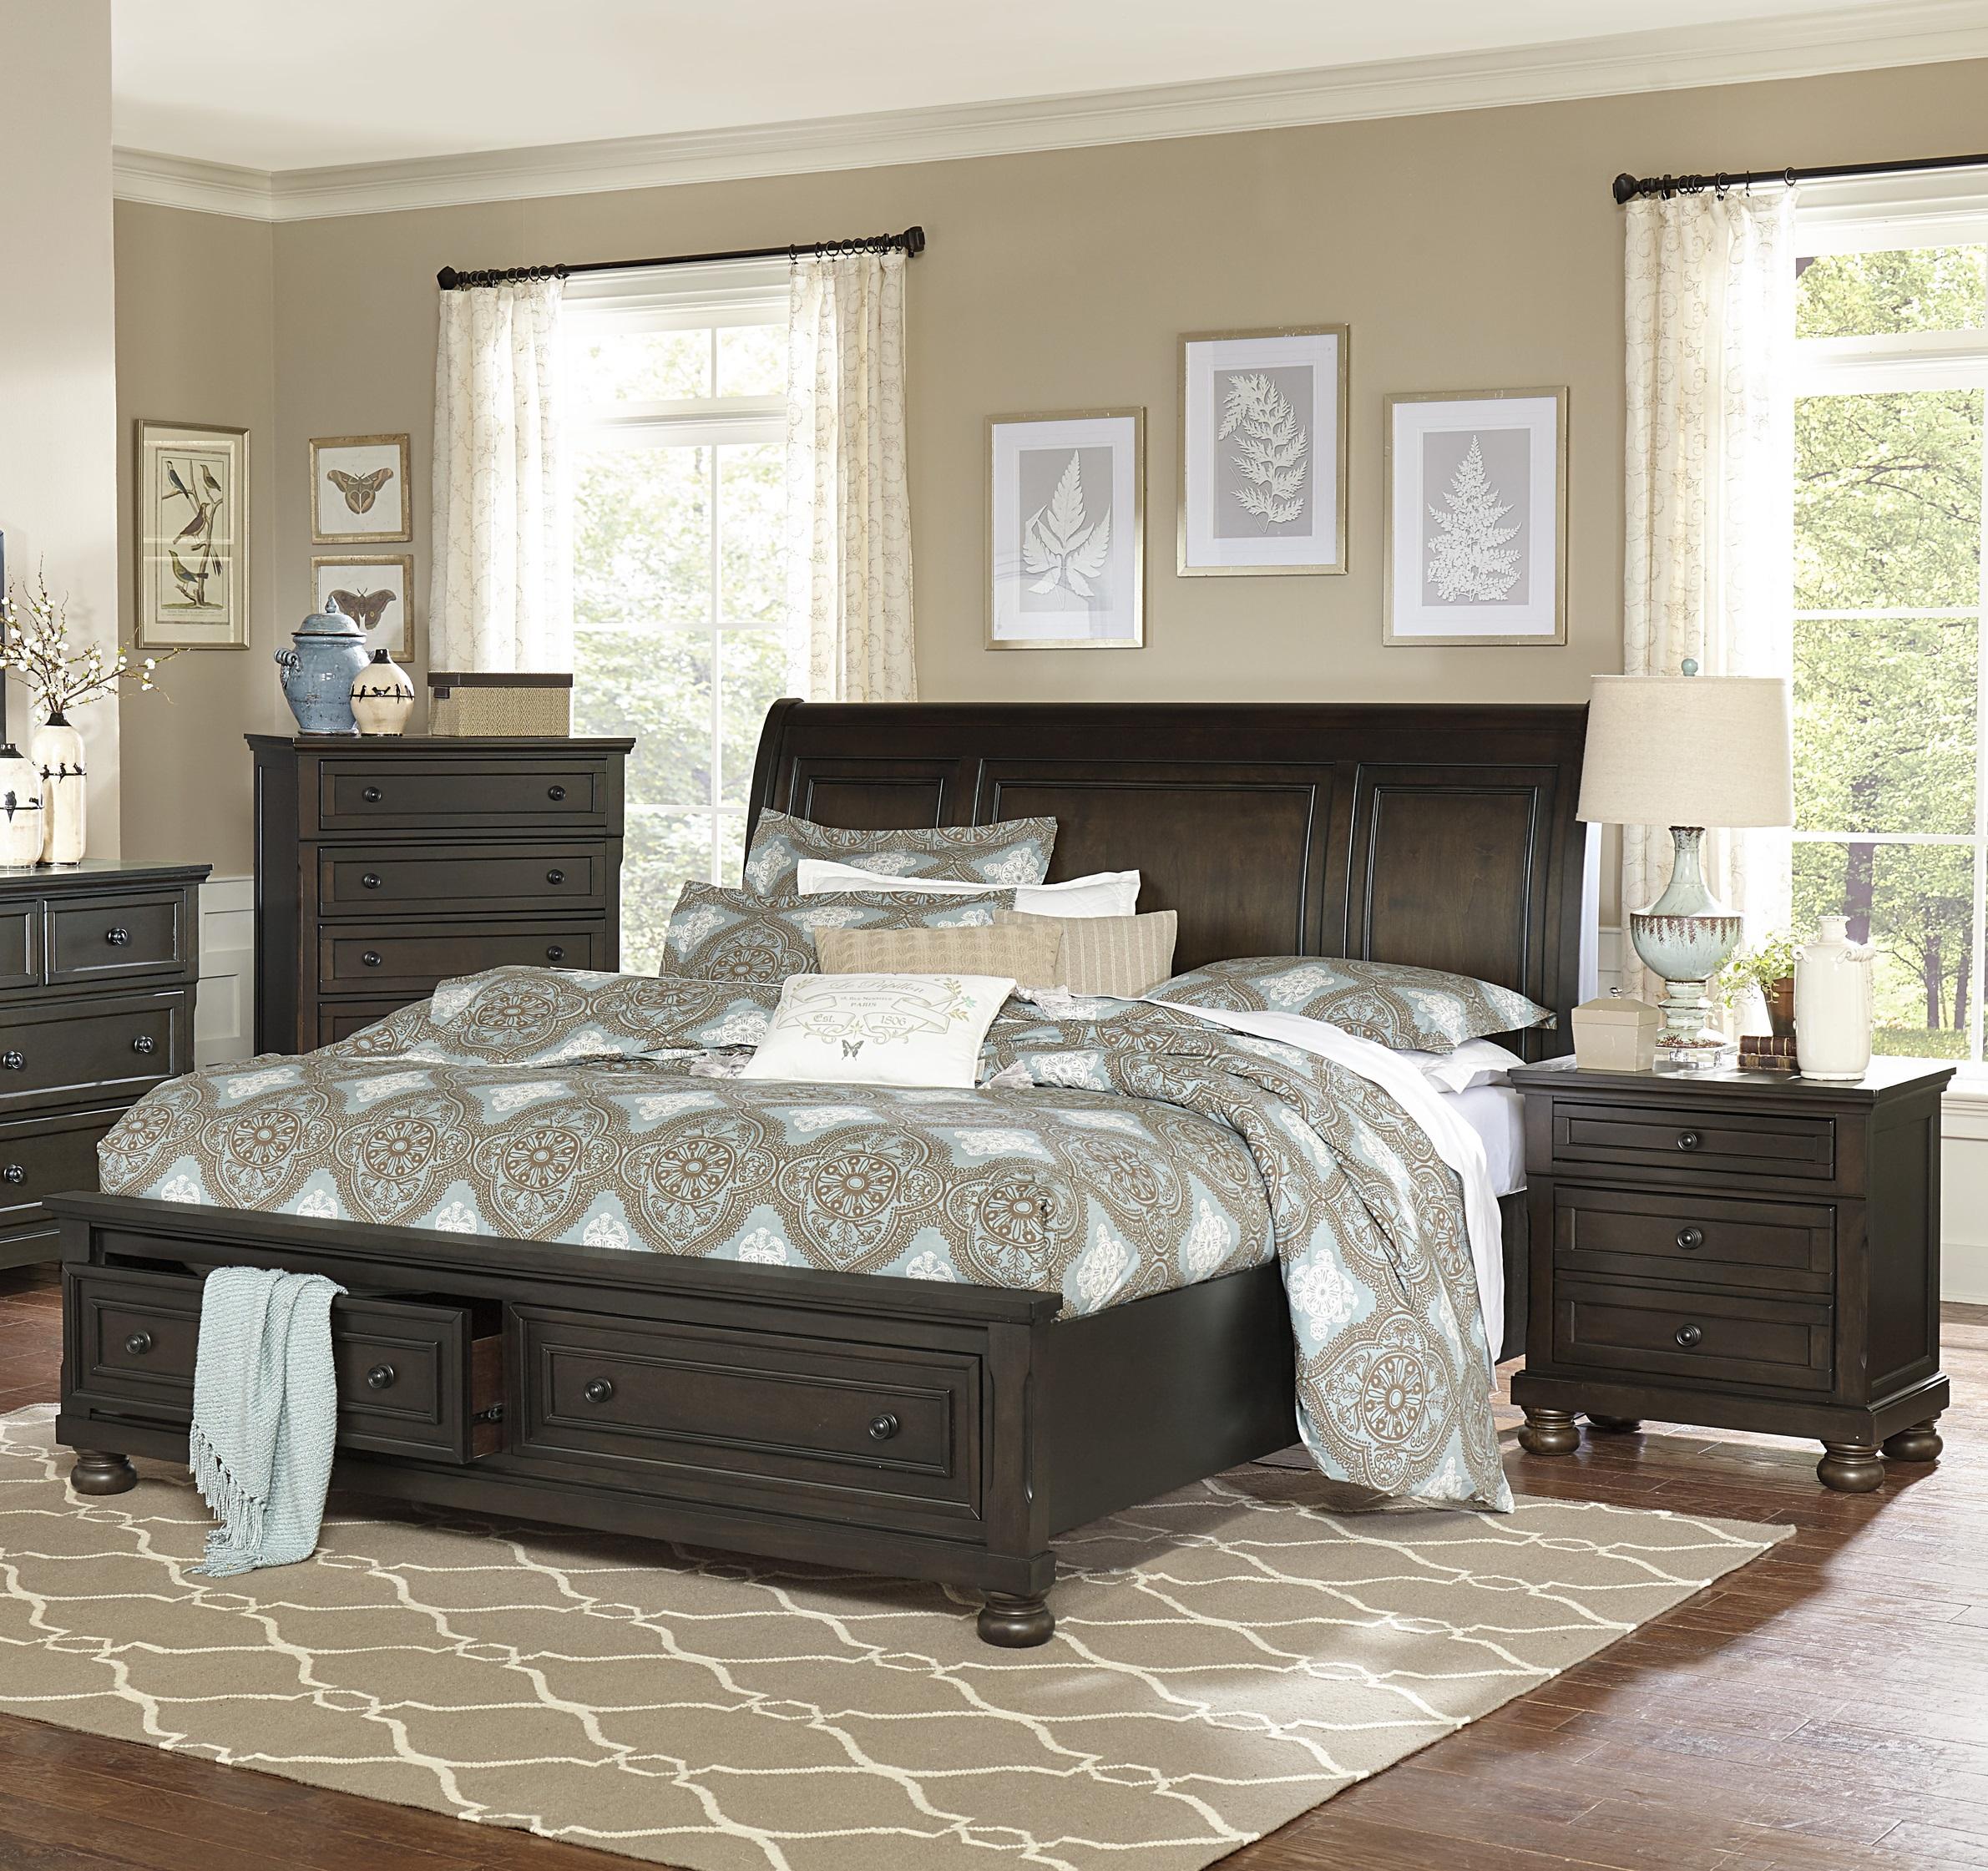 Transitional Bedroom Set 1718KGY-1CK-3PC Begonia 1718KGY-1CK-3PC in Grayish Brown 